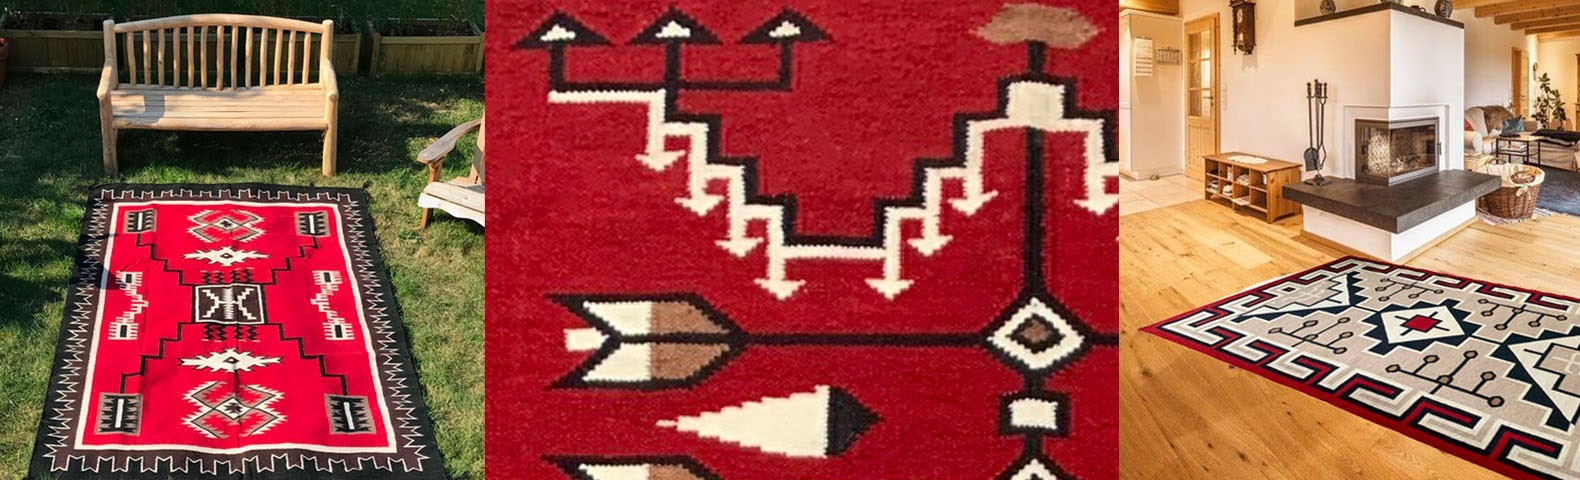 Wool rug with Native American motifs